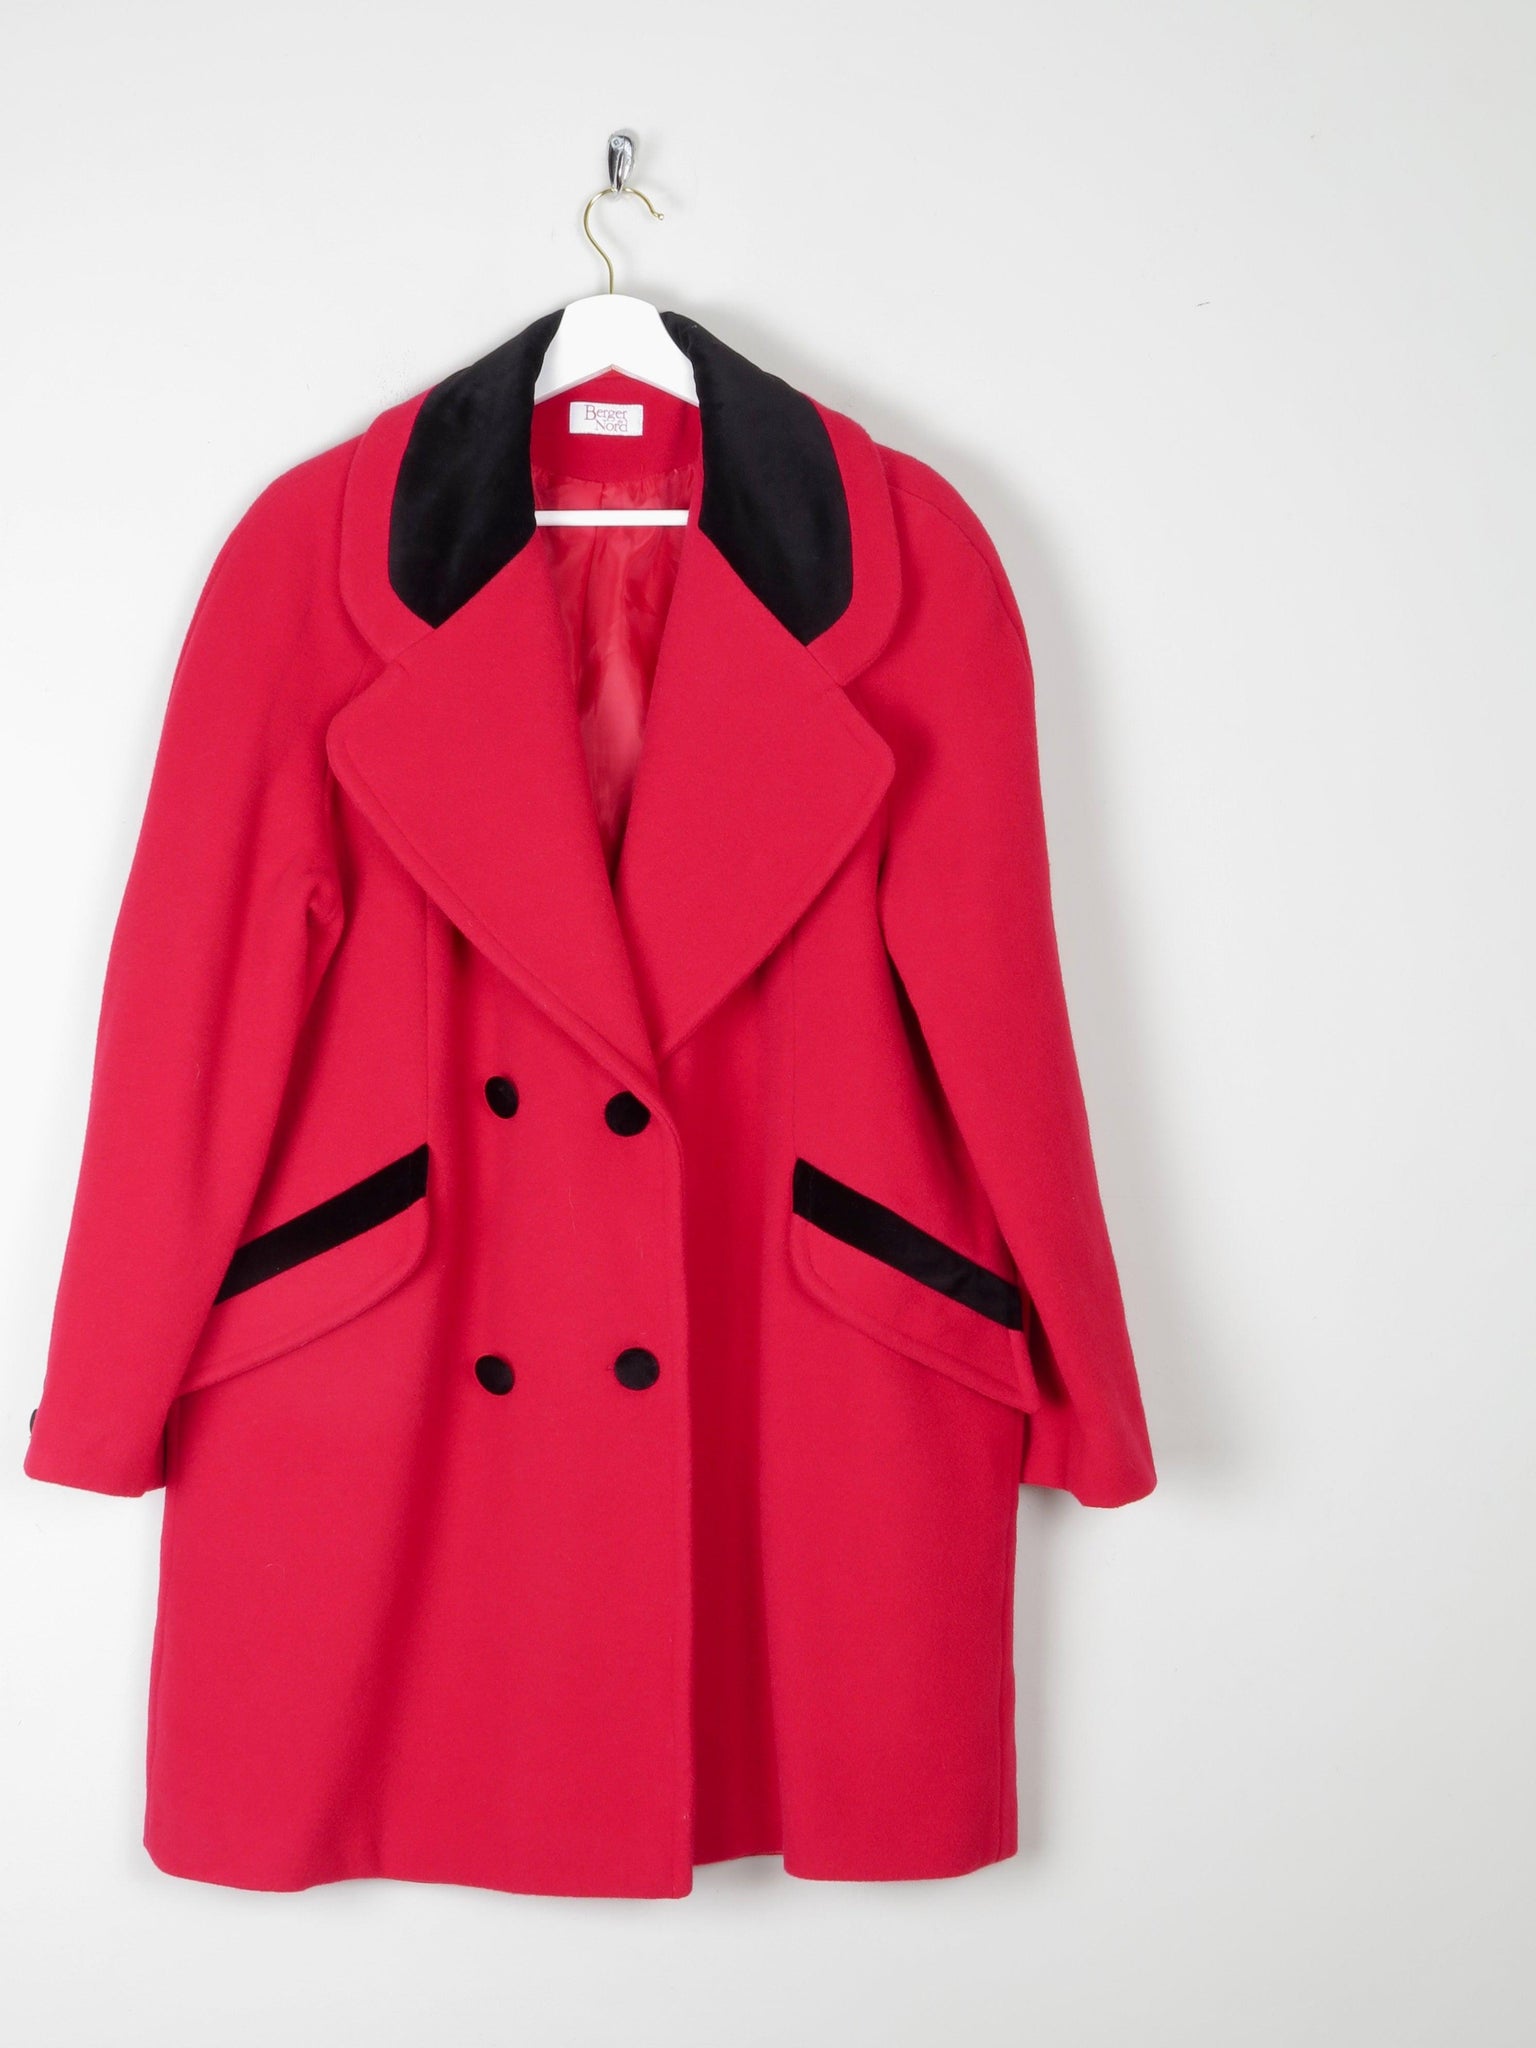 Women's Short Red Wool  Coat With Black Trims M/L - The Harlequin